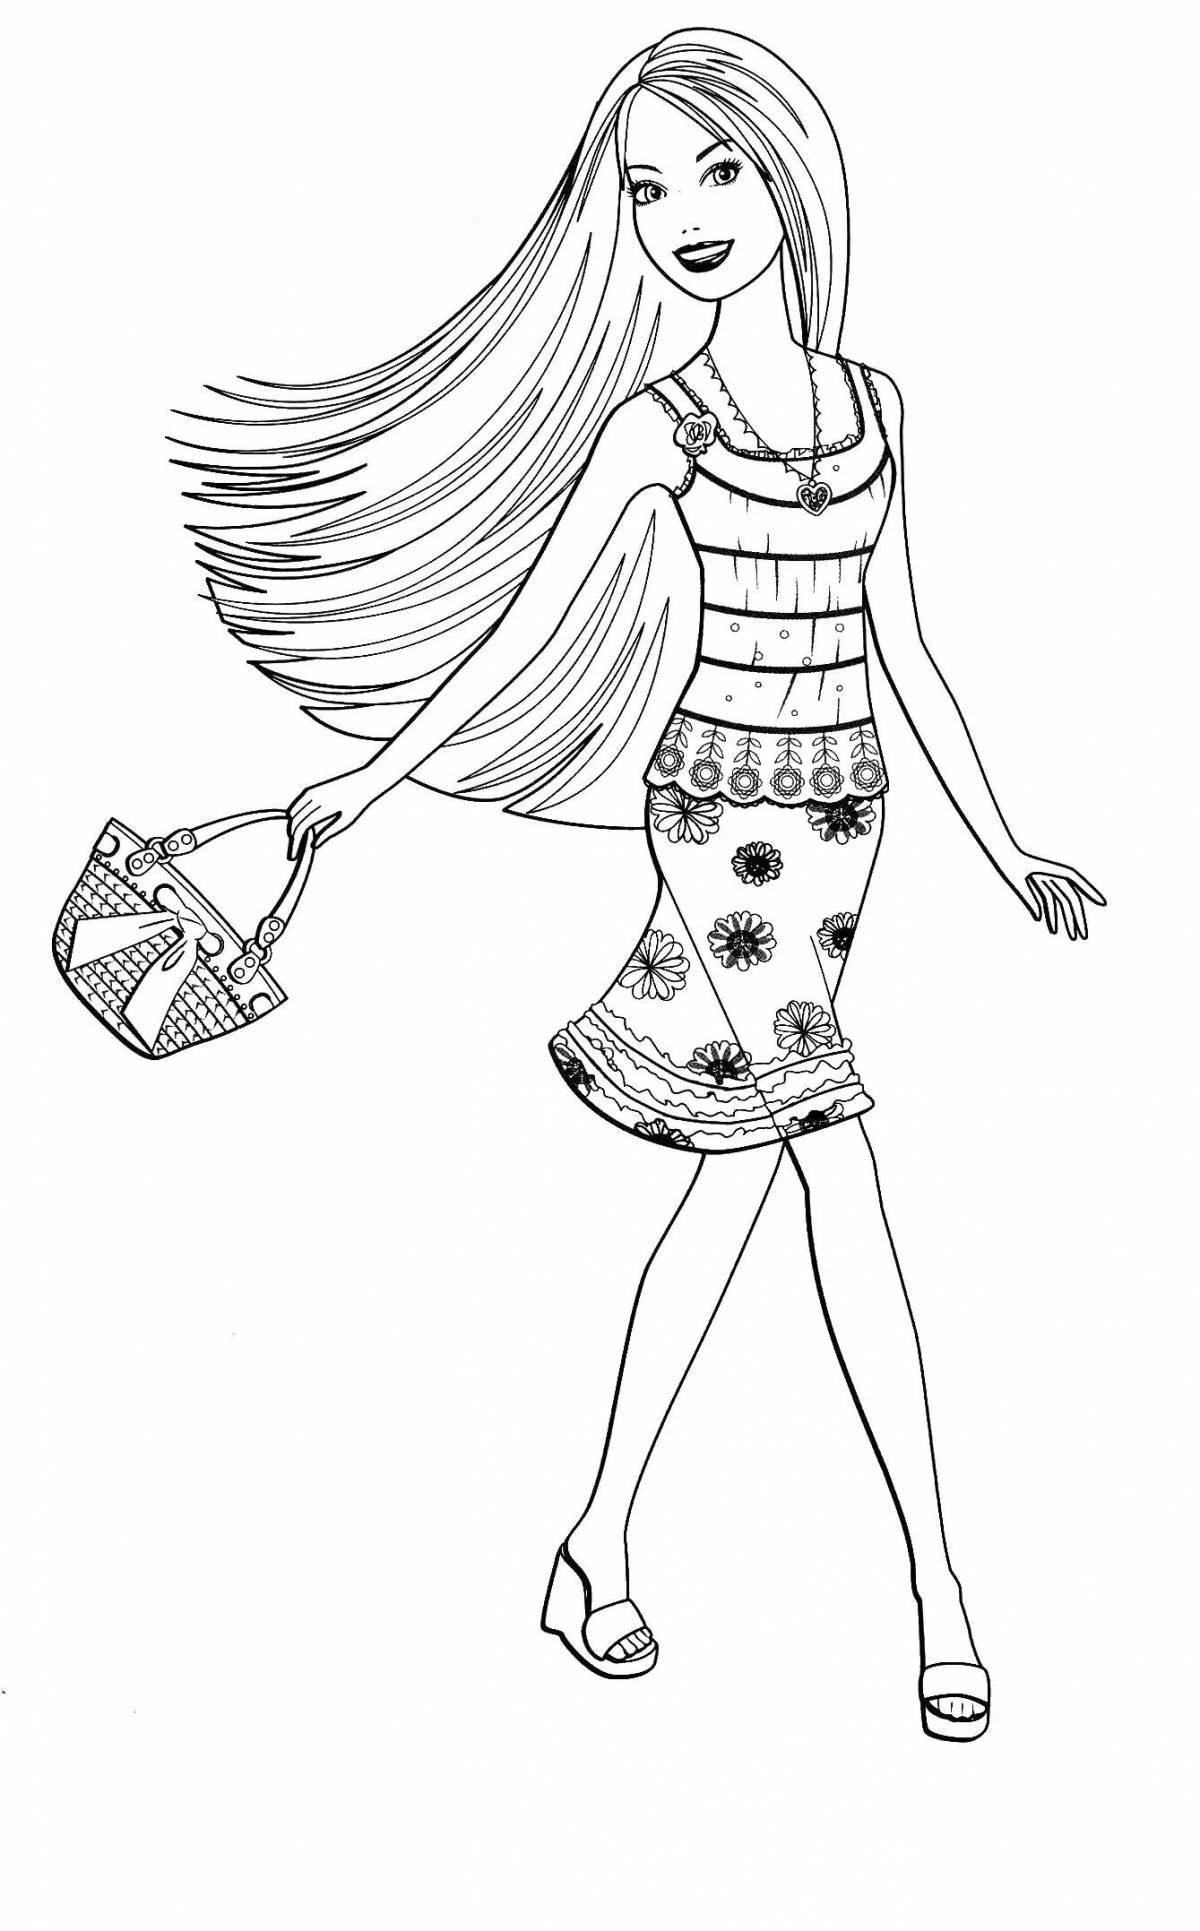 Great barbie doll coloring book